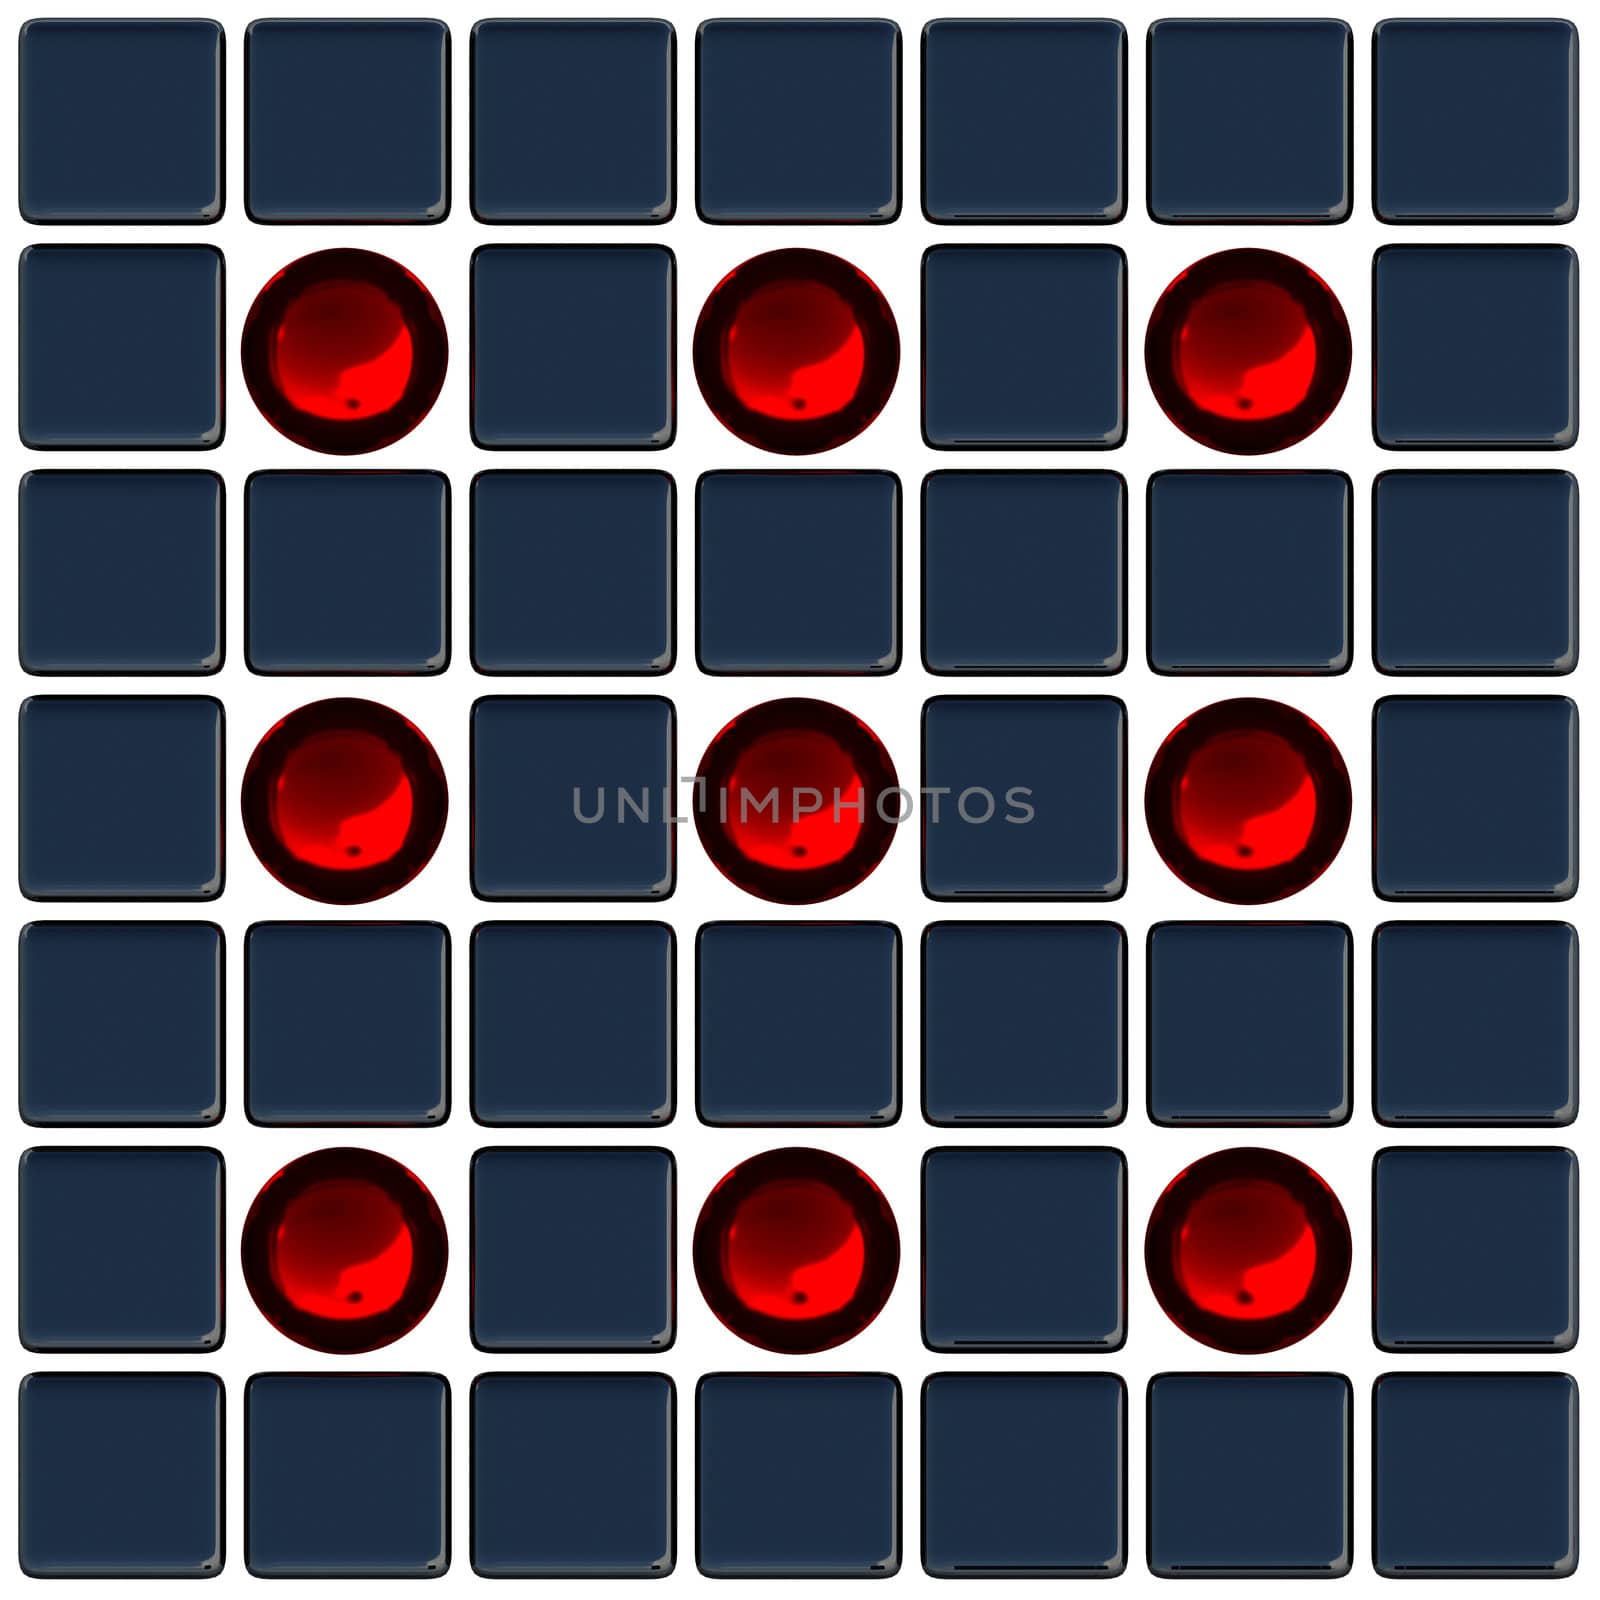 Red balls and black cubes on a white background